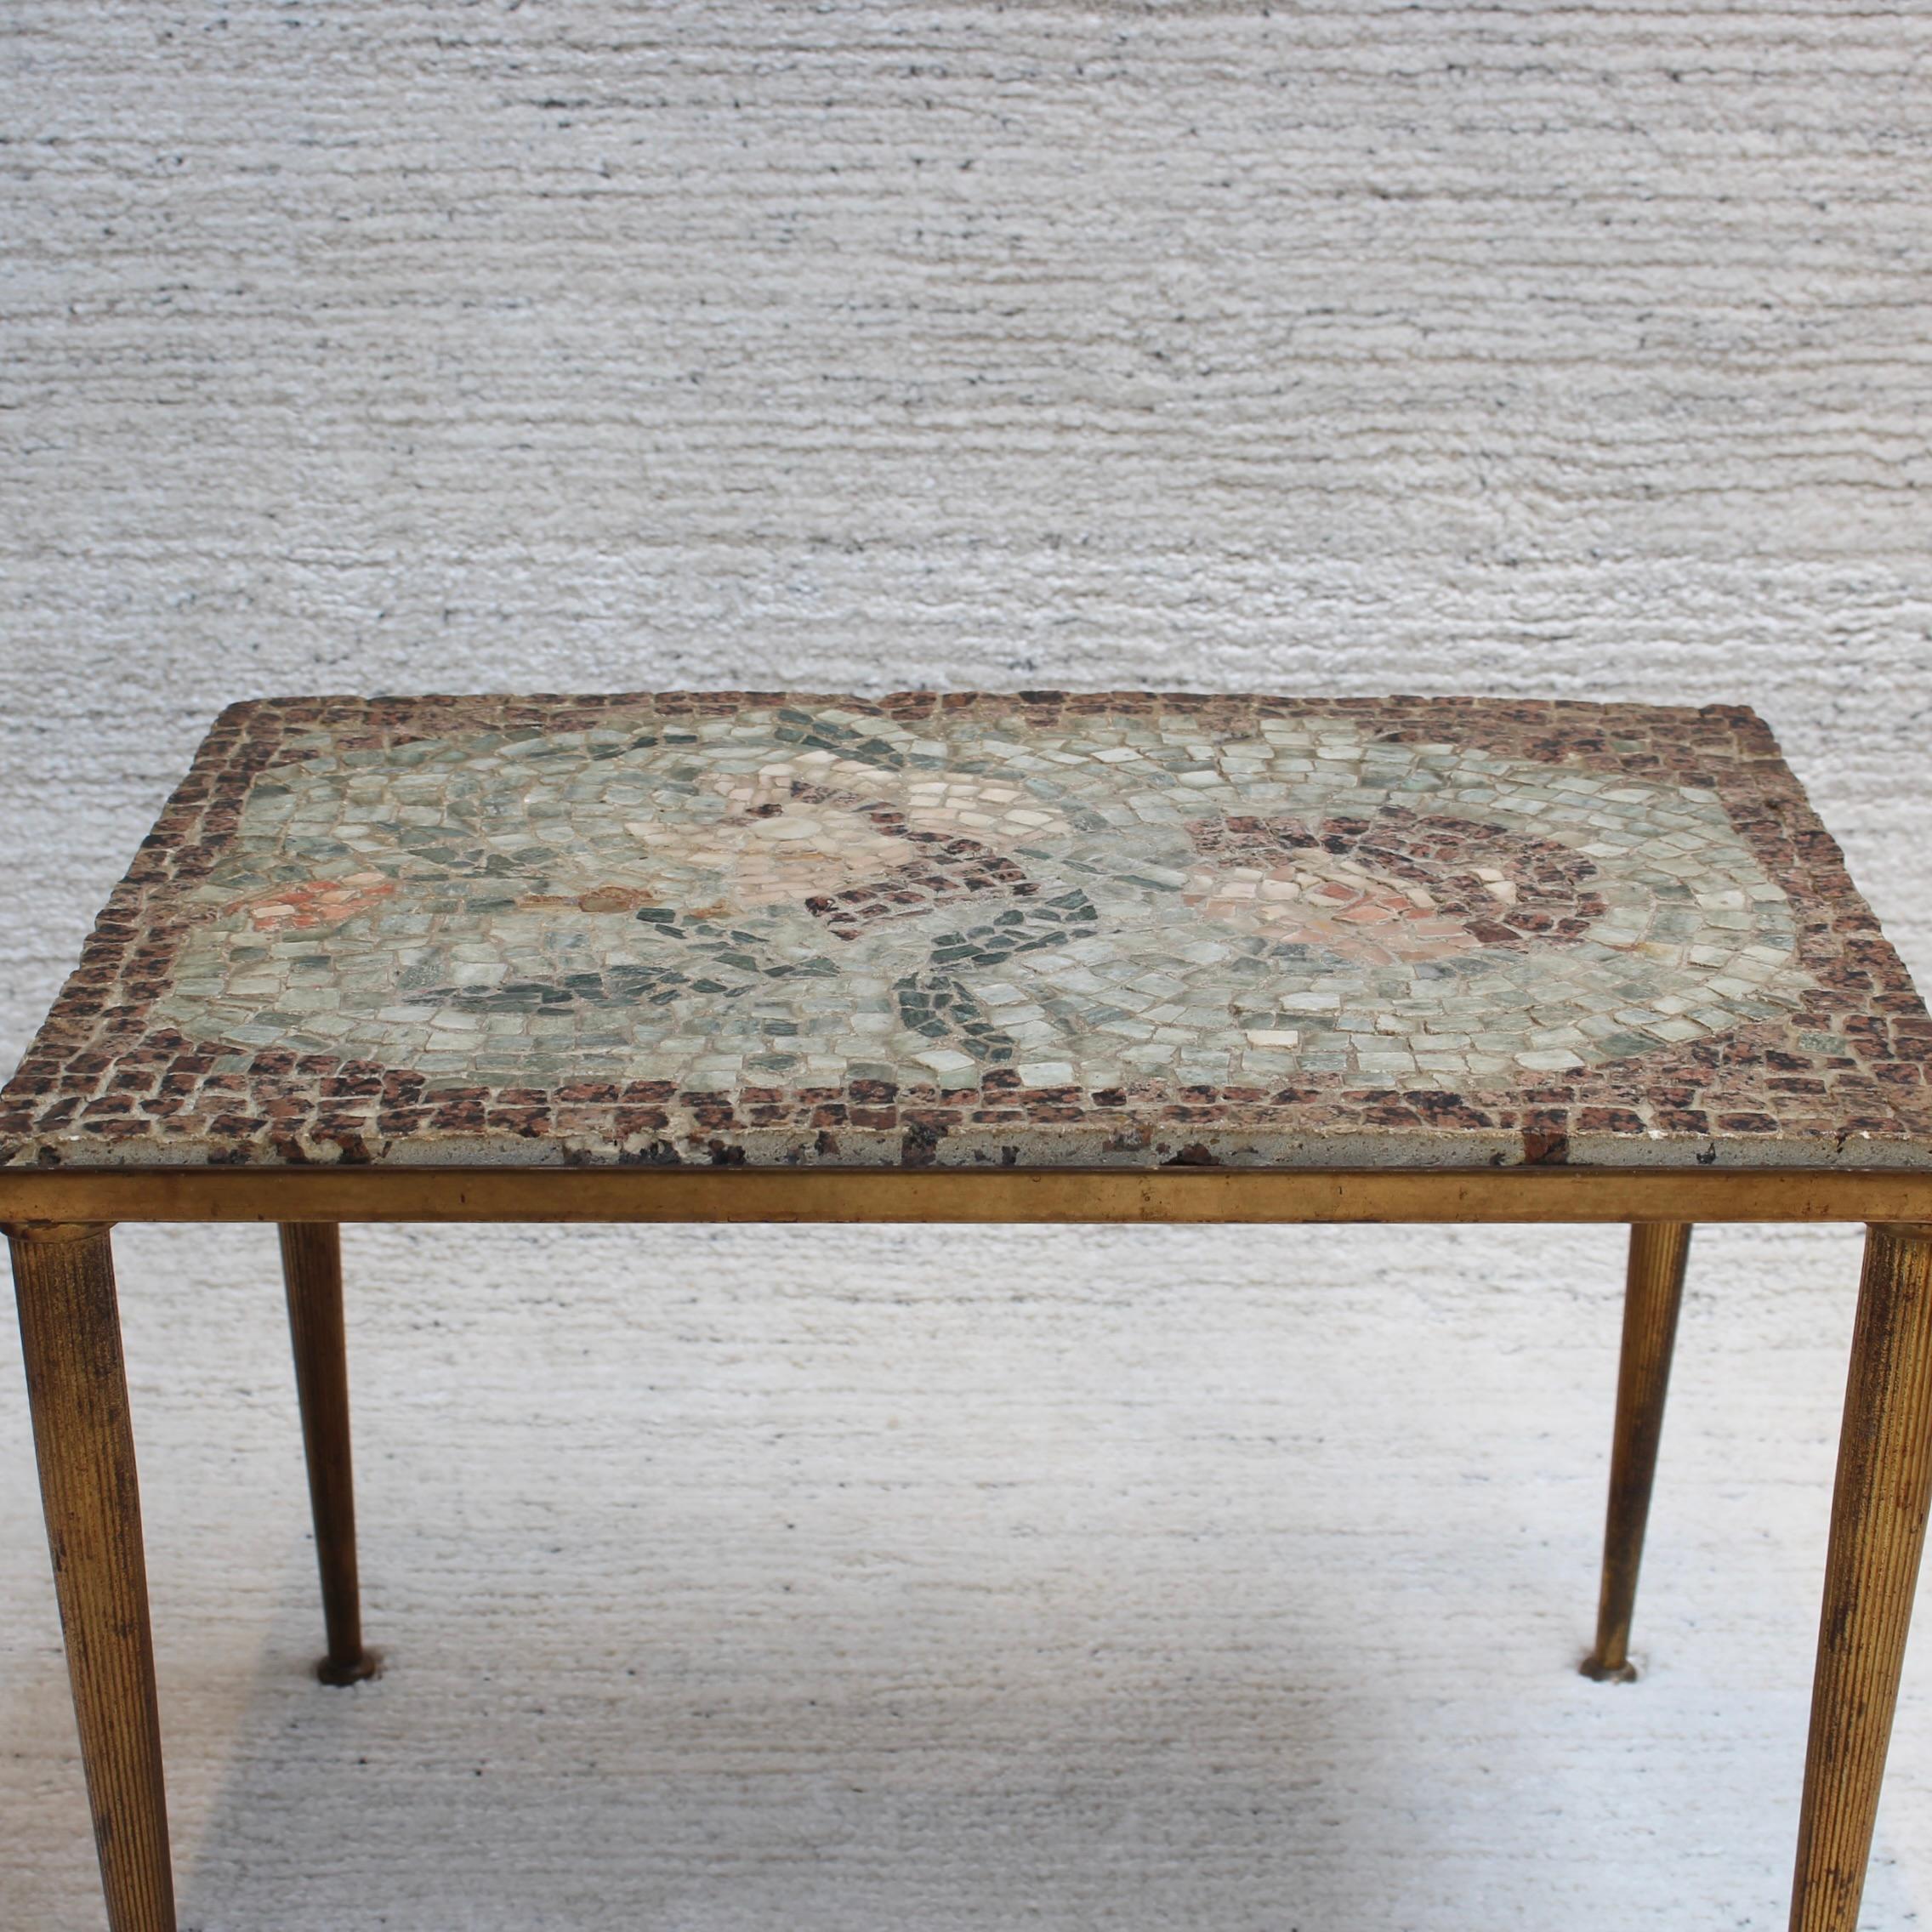 Vintage Low Table with Italian-Style Mosaic Top (circa 1950s). Discovered in the South of France, this is a delightfully engaging side or end table with a mosaic top reminiscent of those found in ancient Rome or Pompeii. In this case it features a